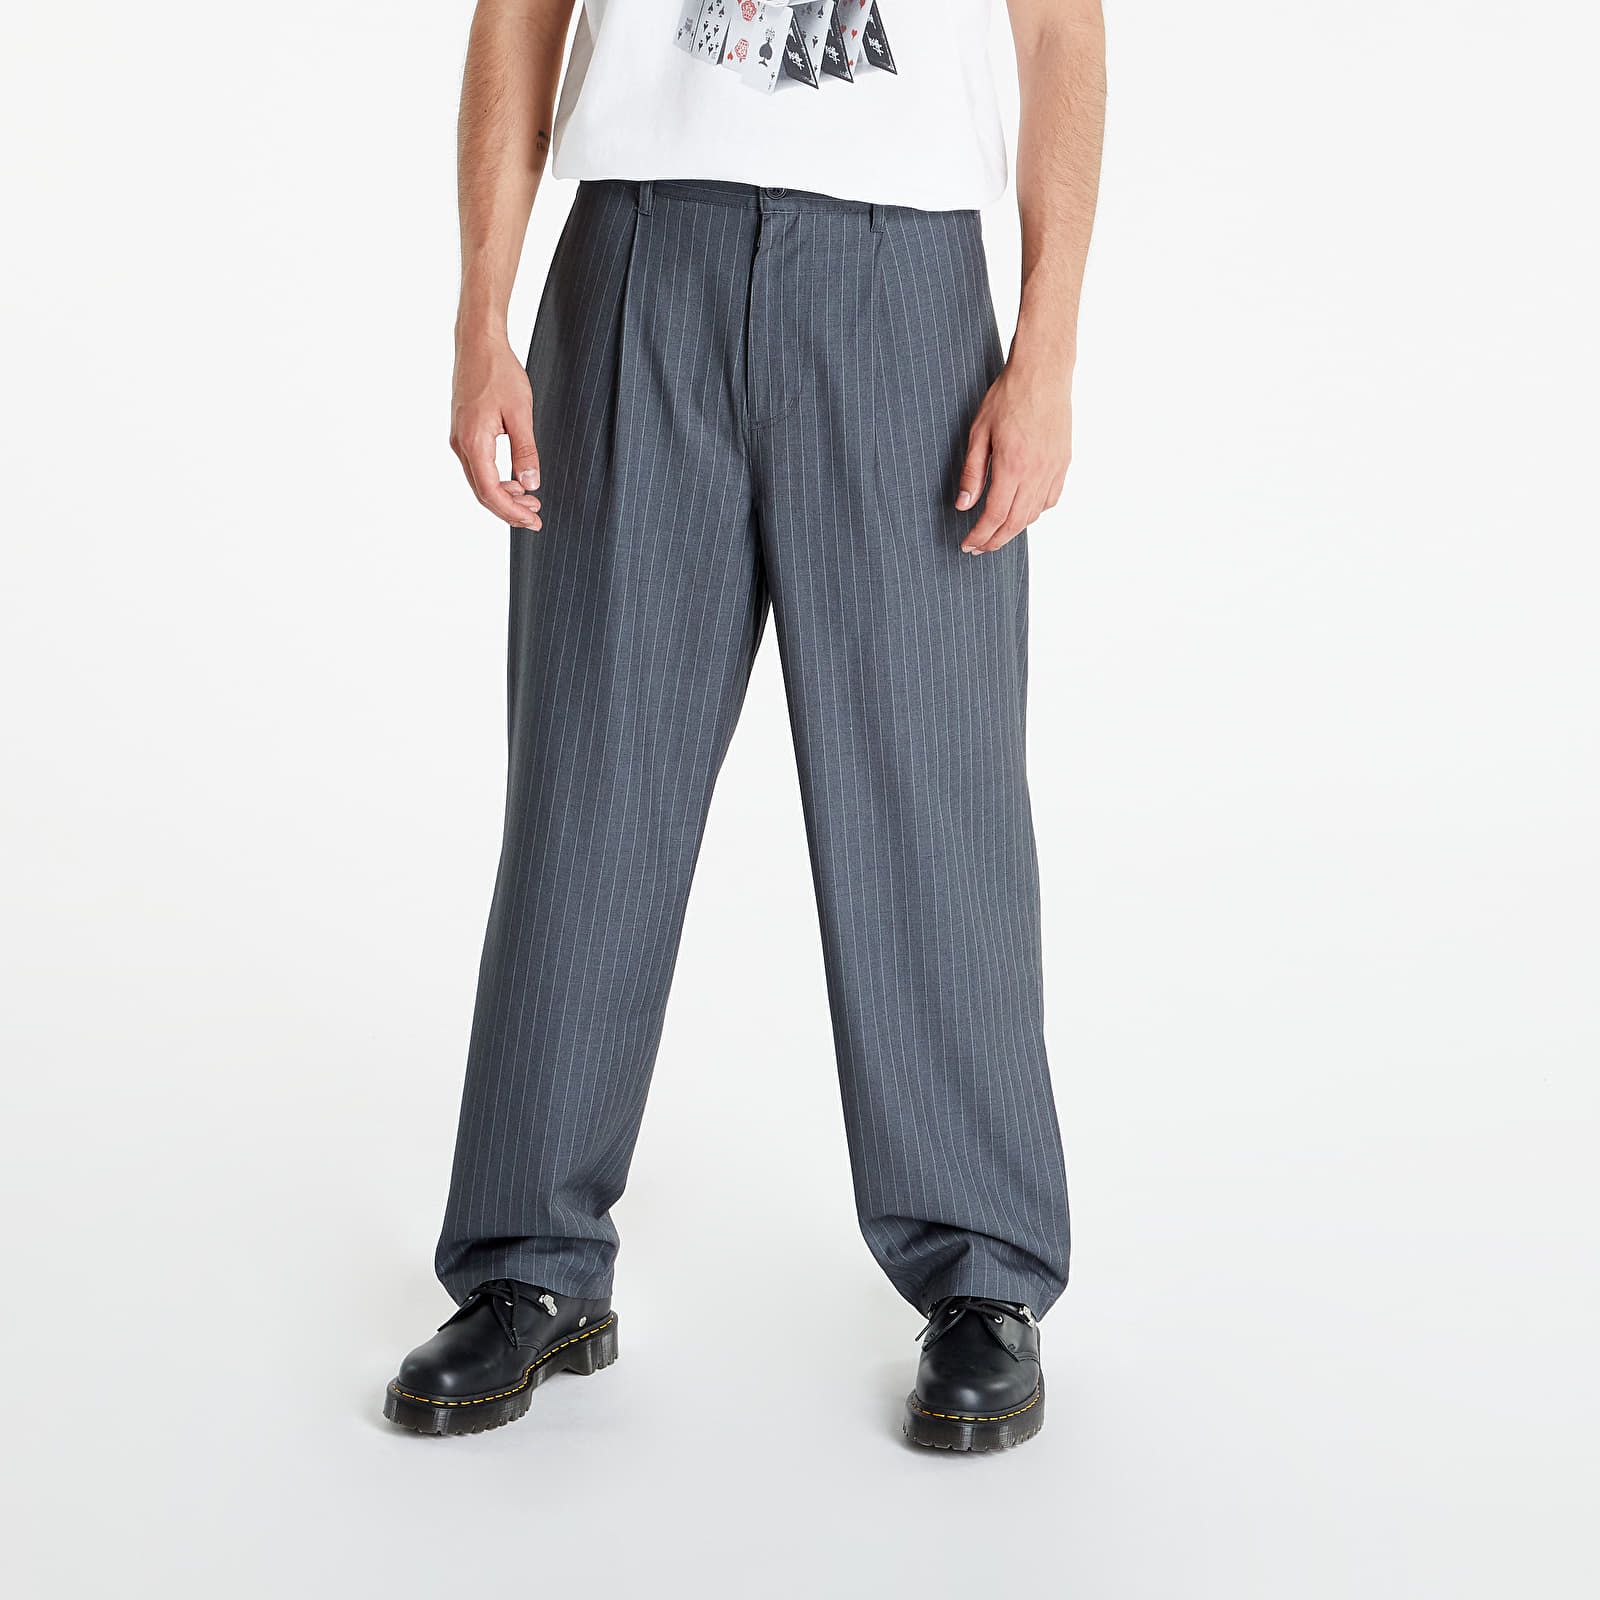 Stussy Striped Volume Pleated Trouser30000円は少し厳しいです